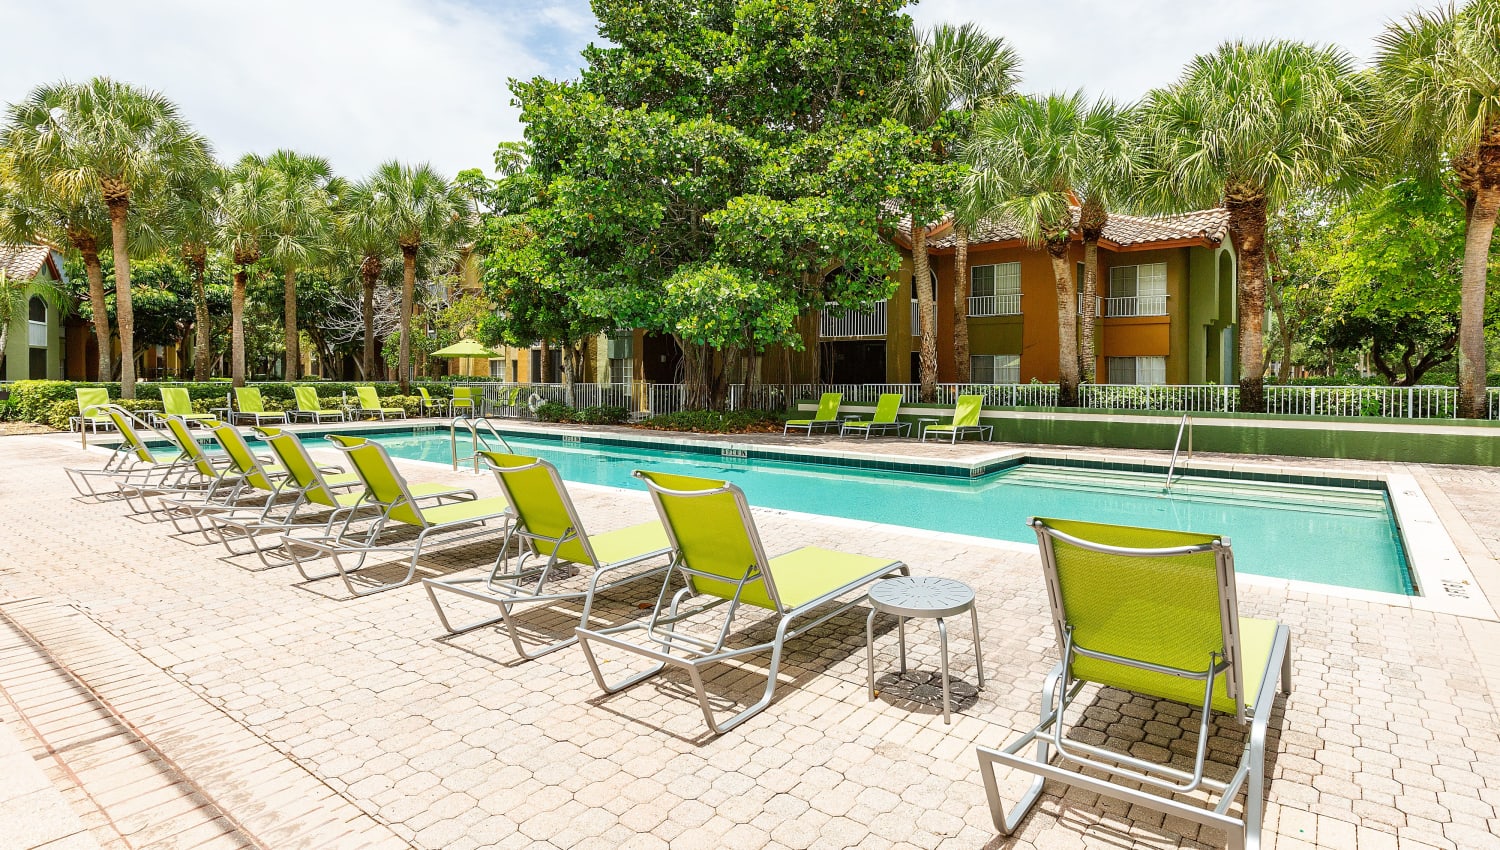 Sparkling pool and lounge chairs at Mosaic Apartments in Coral Springs, Florida